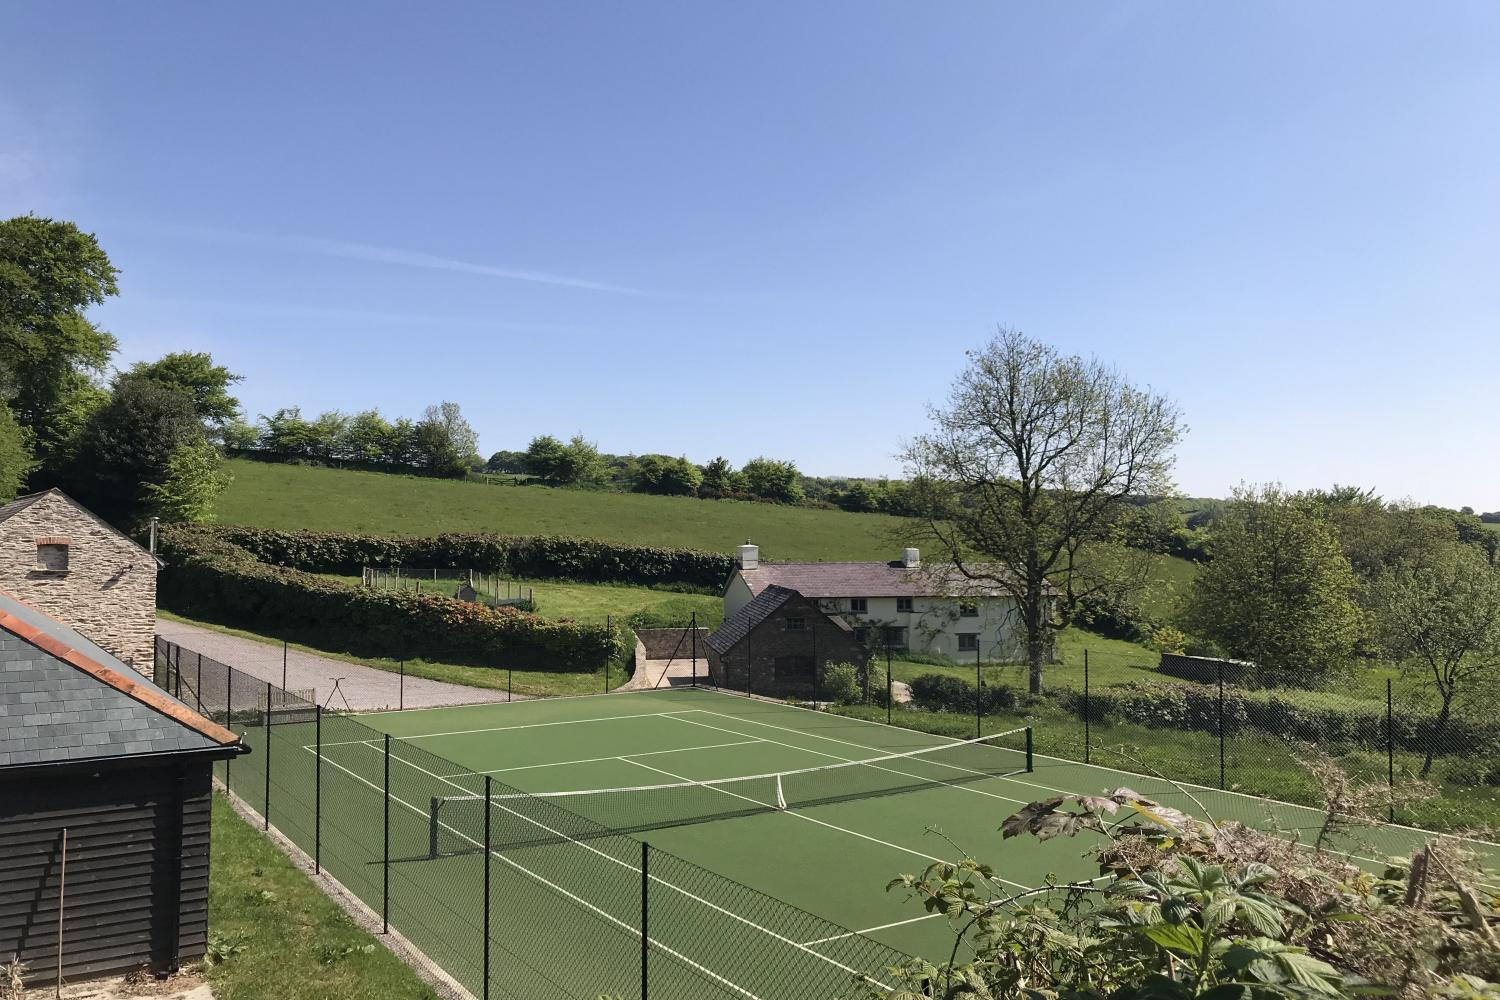 The Cowshed tennis court